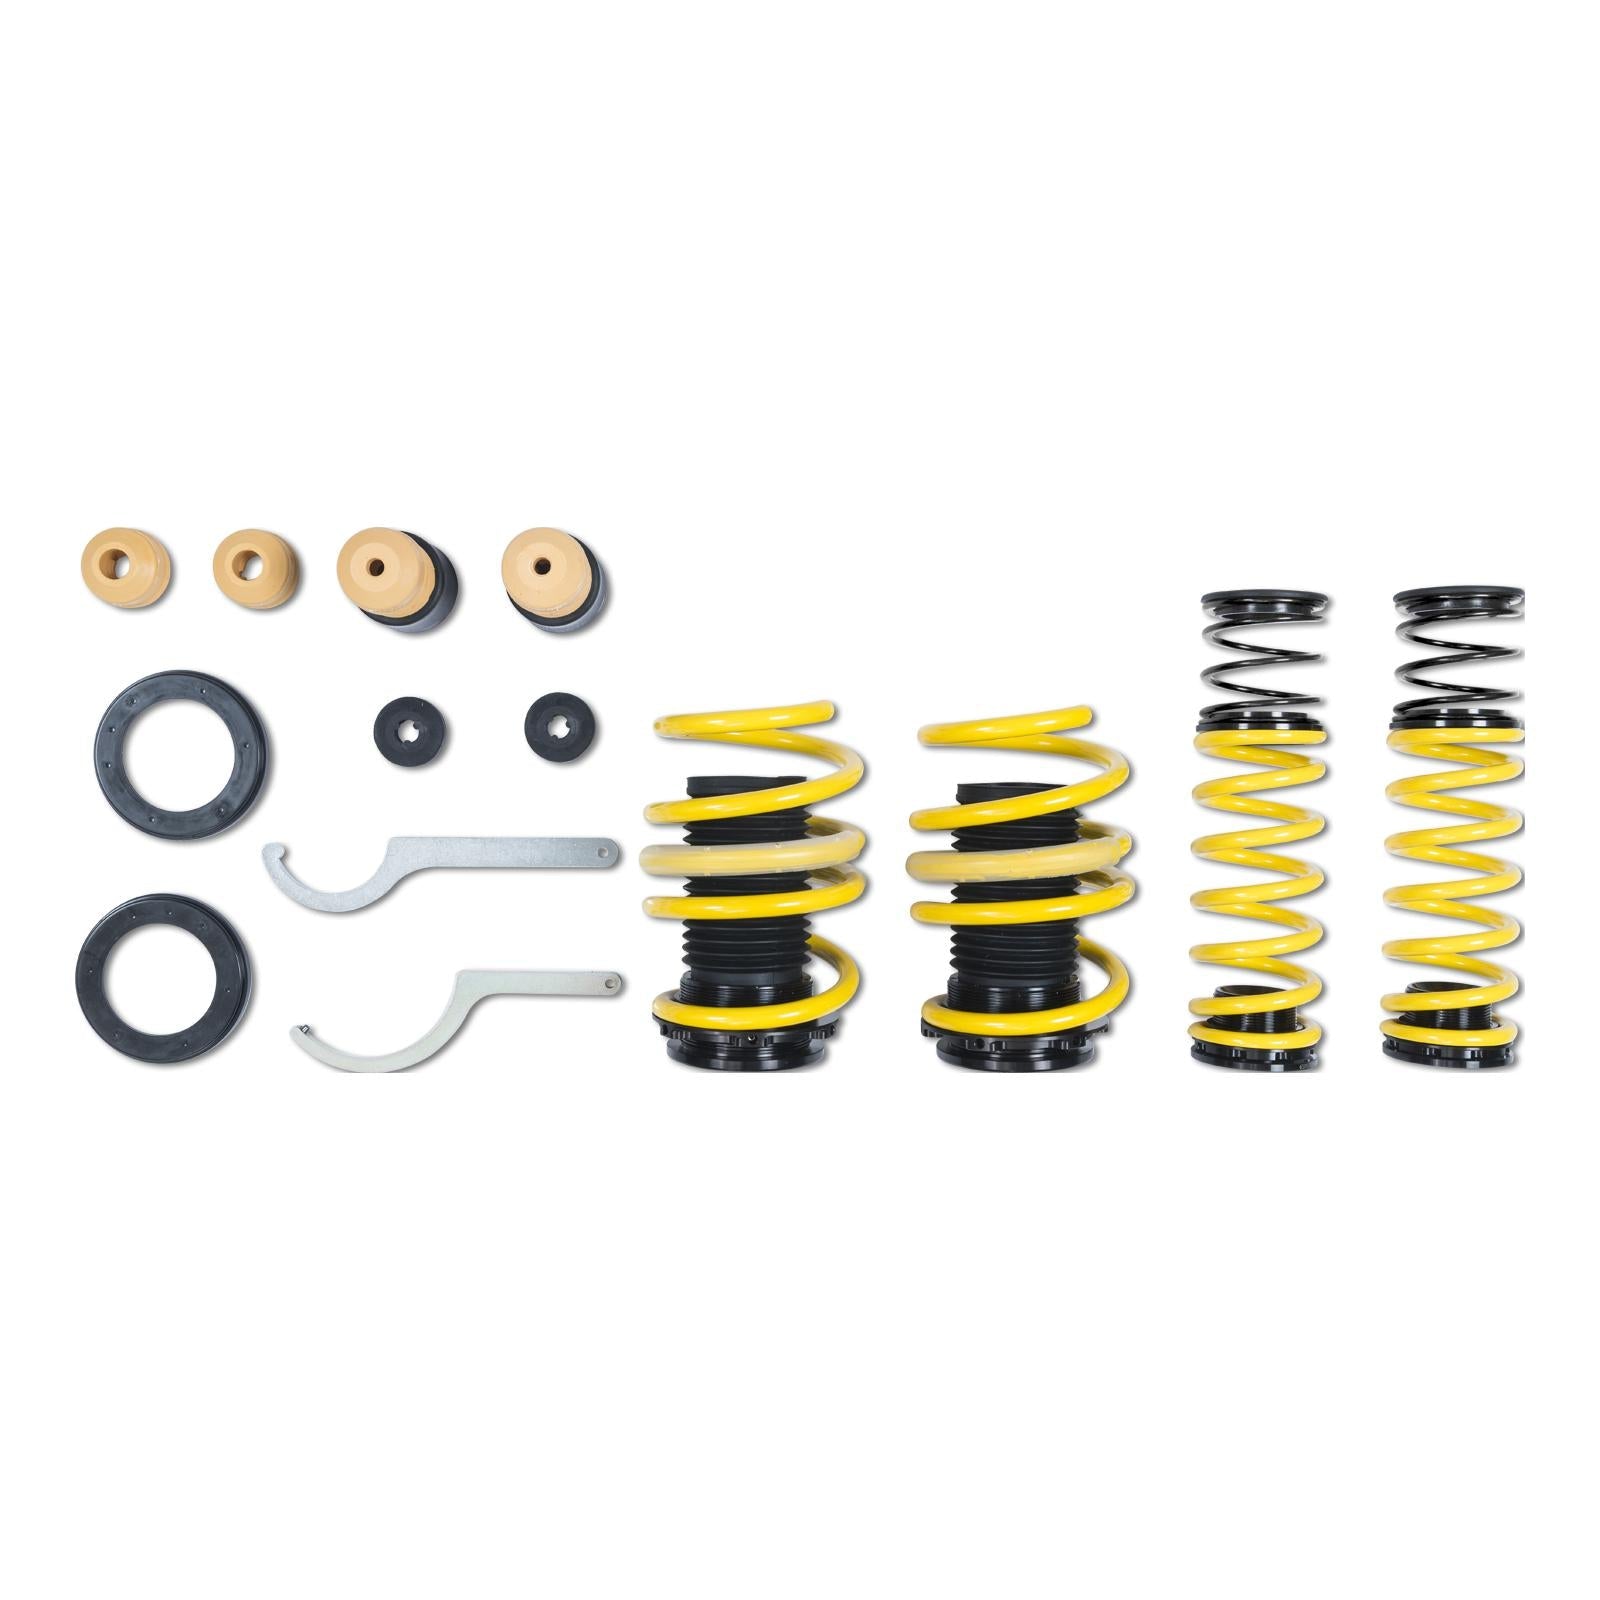 ST Suspensions Adjustable Lowering Springs - Audi B9 A5/S5 Sportback/Convertible AWD